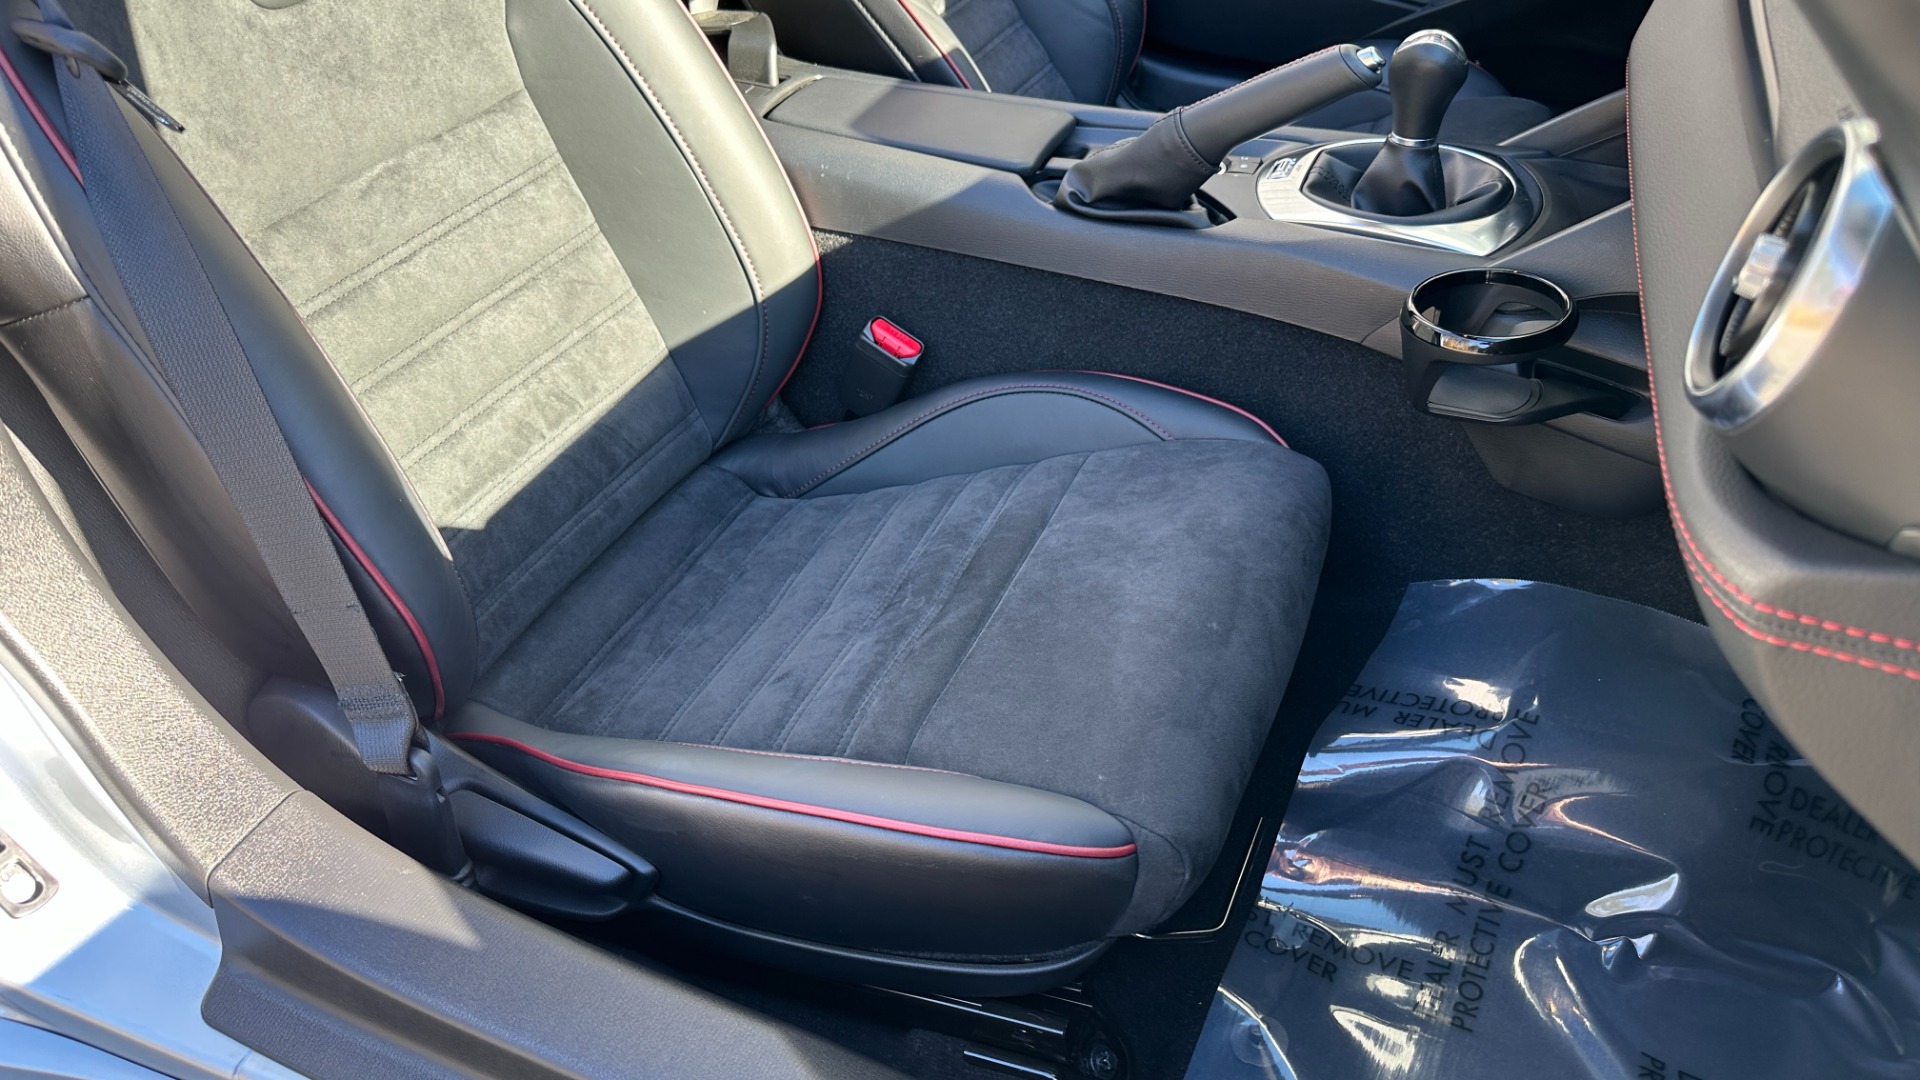 Used 2020 FIAT 124 Spider ARBARTH / MONZA EXHAUST / RECARO SPORT SEATS / BREMBO BRAKES / 6 SPEED for sale $29,995 at Formula Imports in Charlotte NC 28227 25